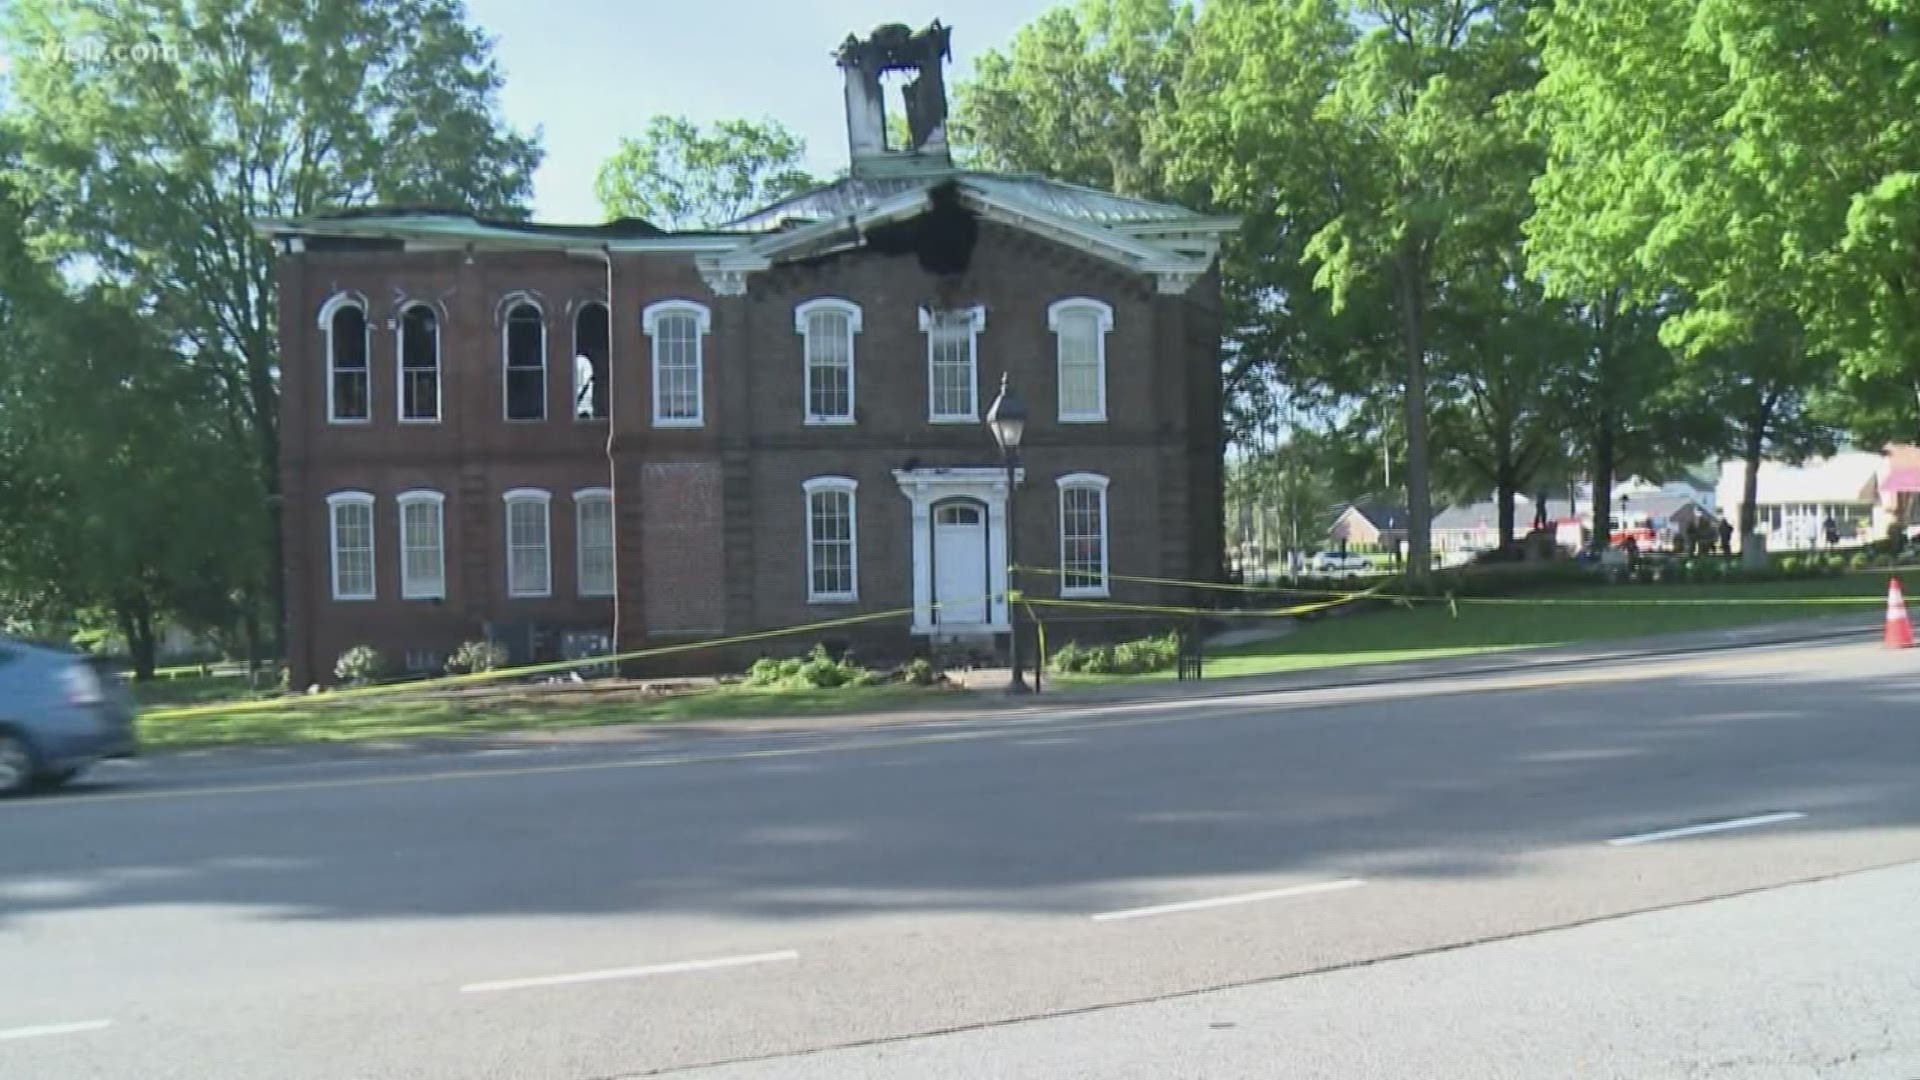 Almost a week after a devastating fire at the Loudon County courthouse, some of the offices opened in a temporary location down the road.